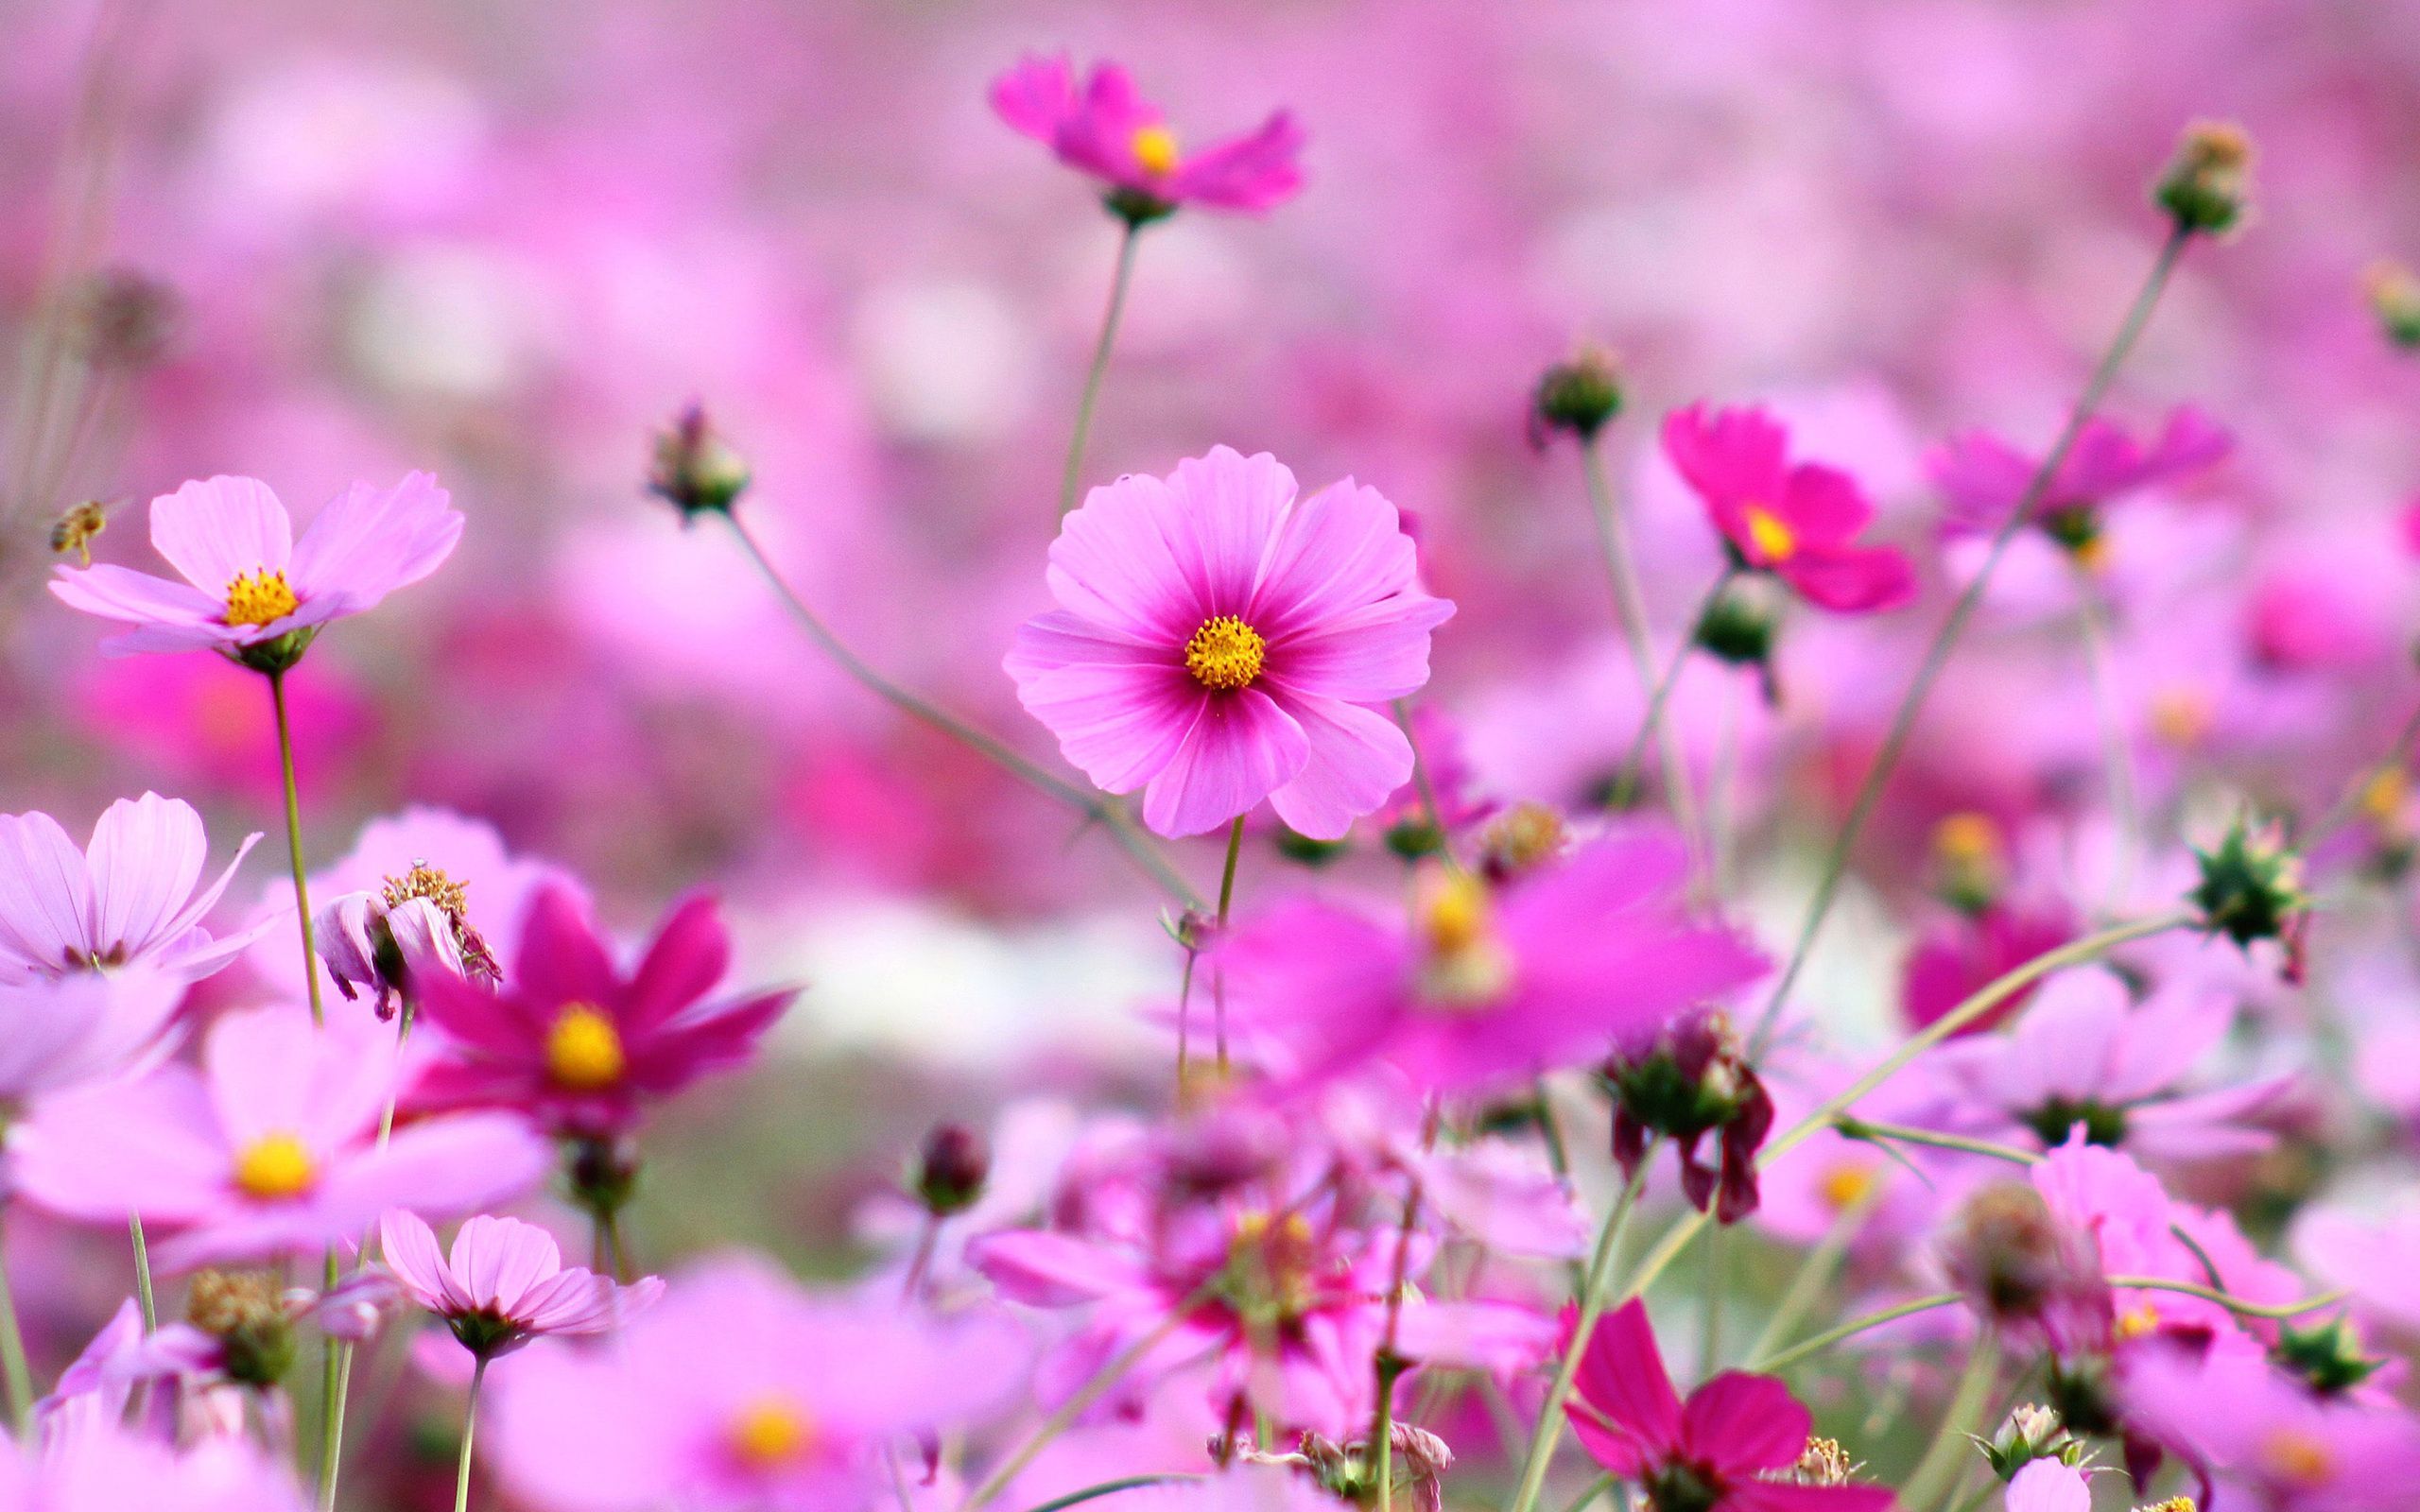 bunch of flowers images and wallpapers Download